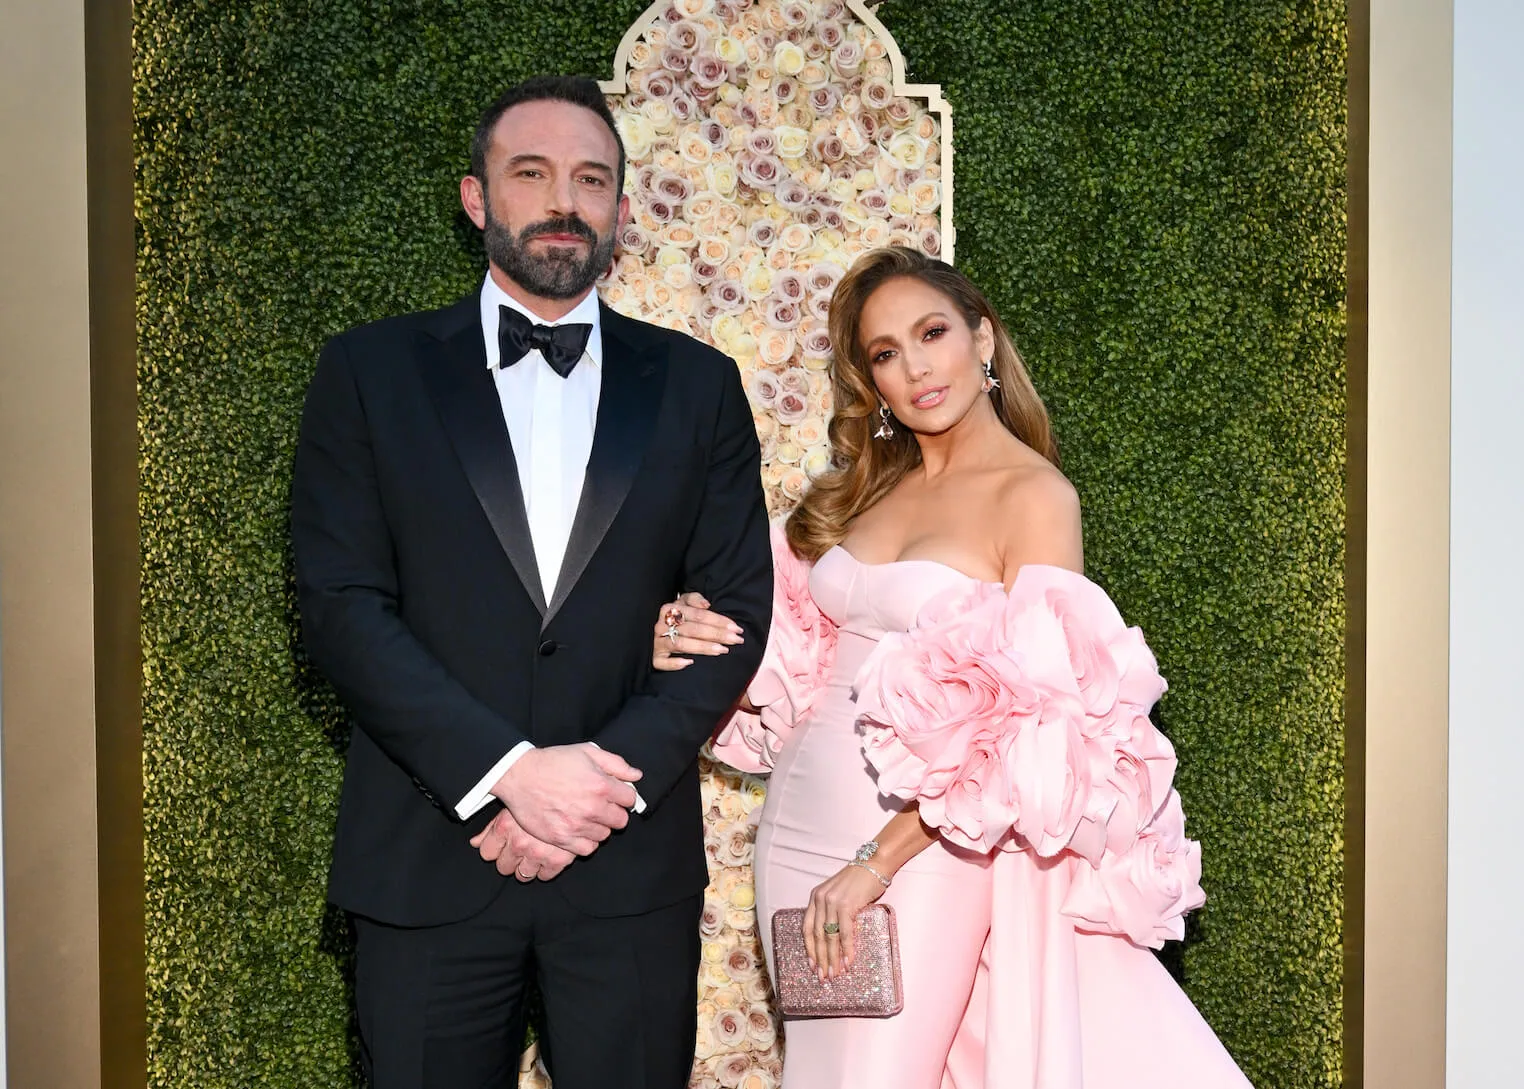 Ben Affleck in a tuxedo posing withJennifer Lopez in a pink dress at the 81st Golden Globes